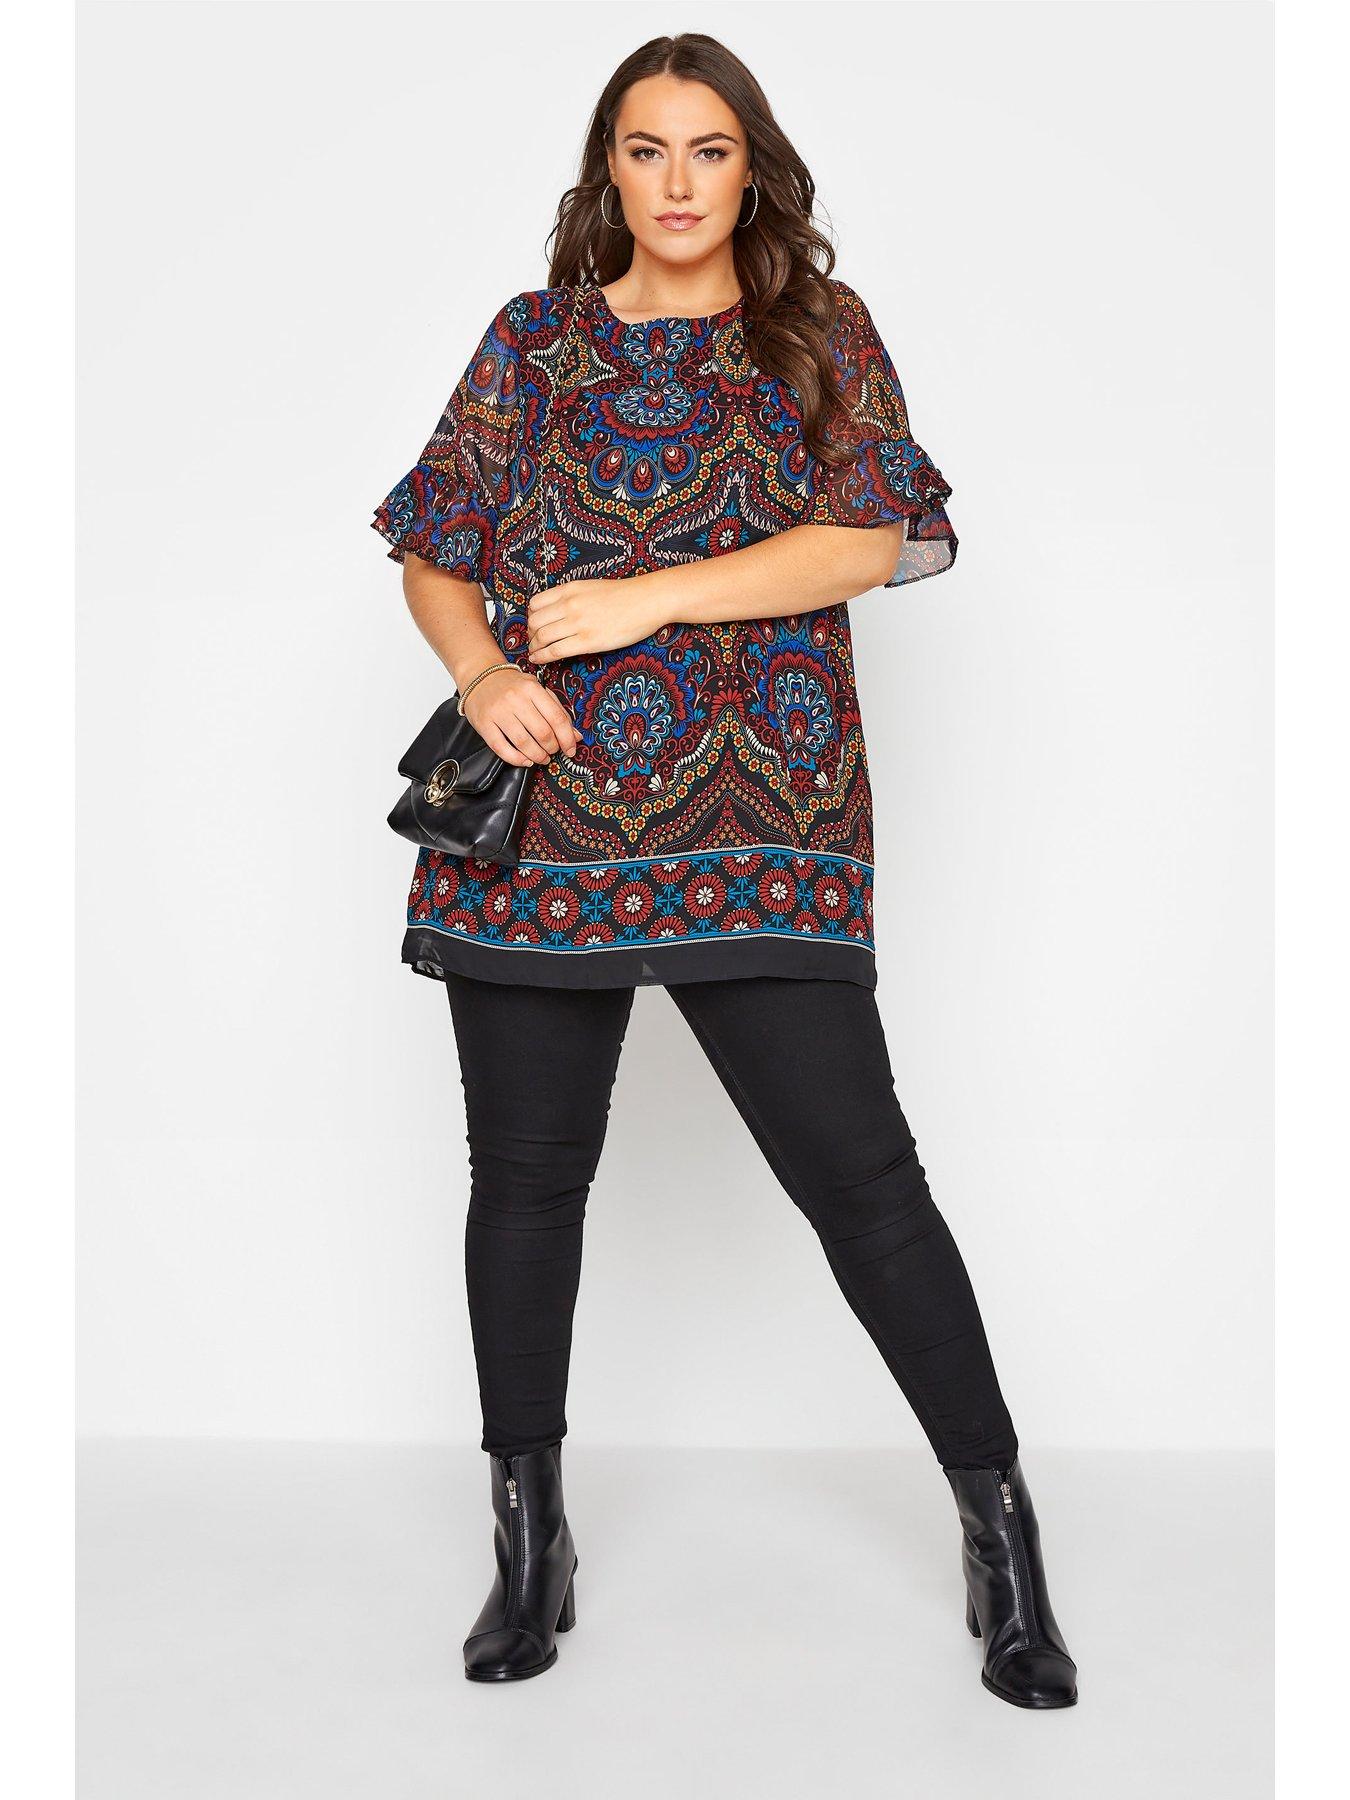 Women tunic top with frill Sleeve Black Blue Paisley